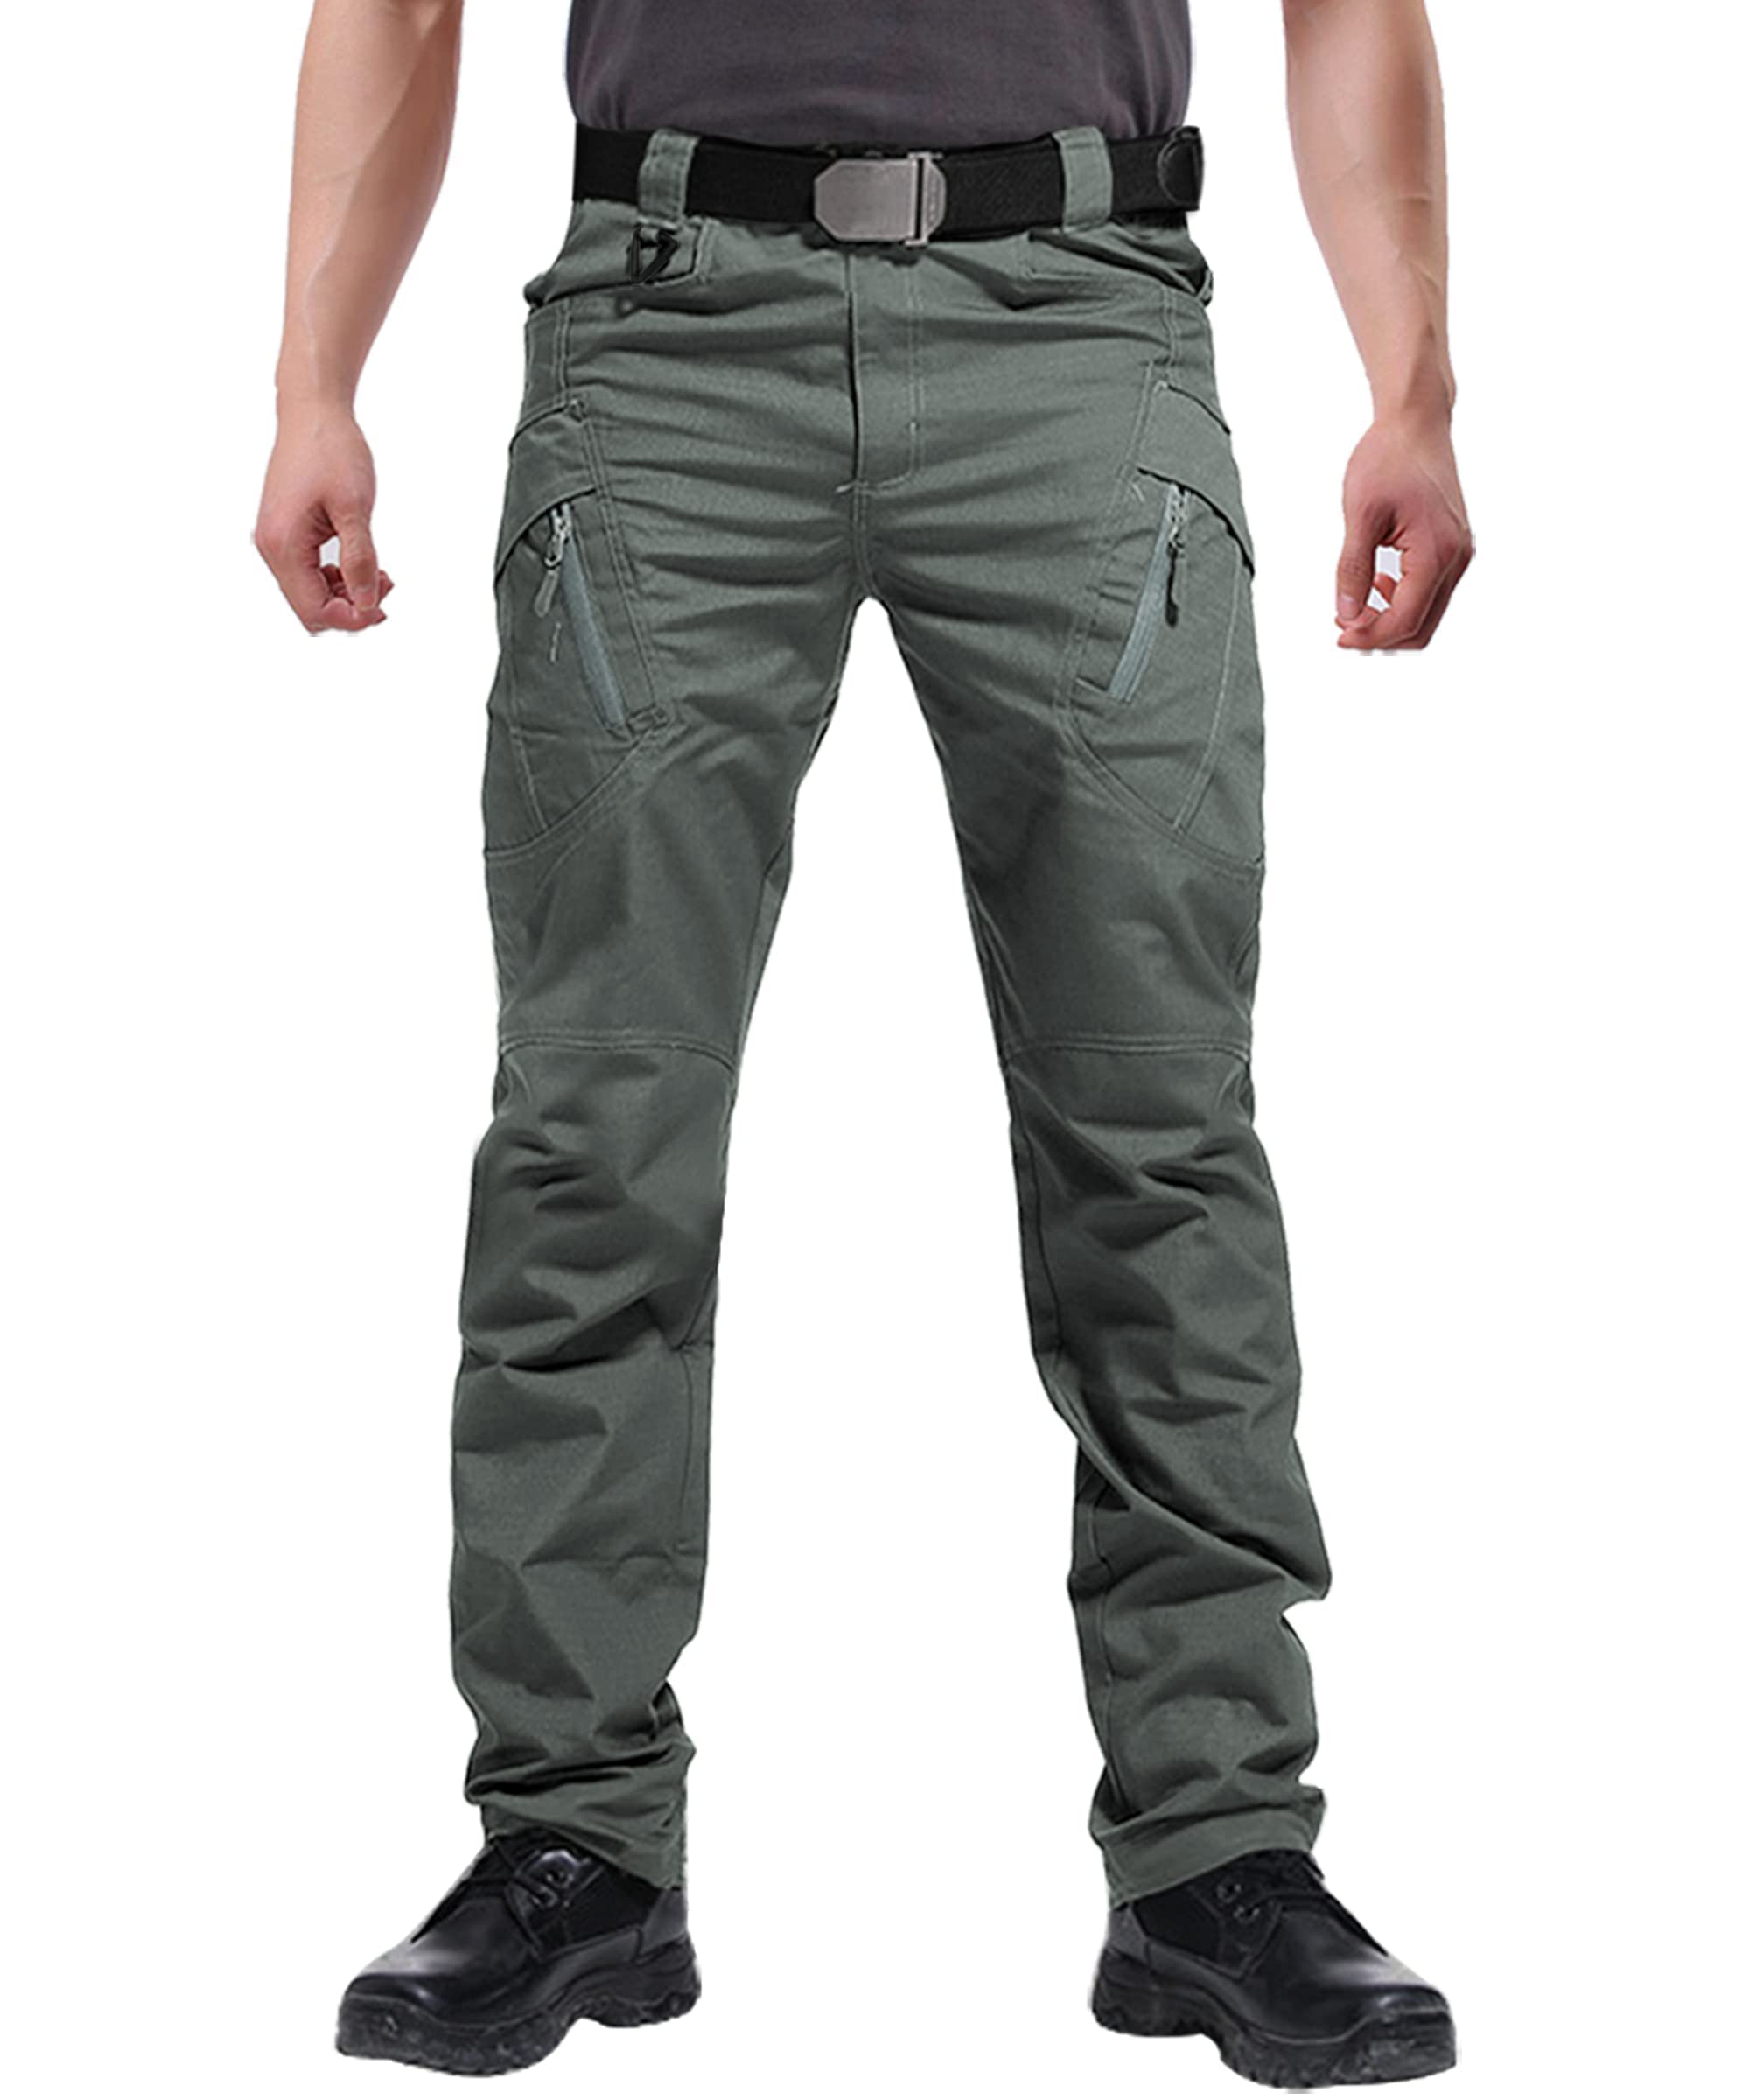 Military Cargo Trousers - Buy Military Cargo Trousers online in India